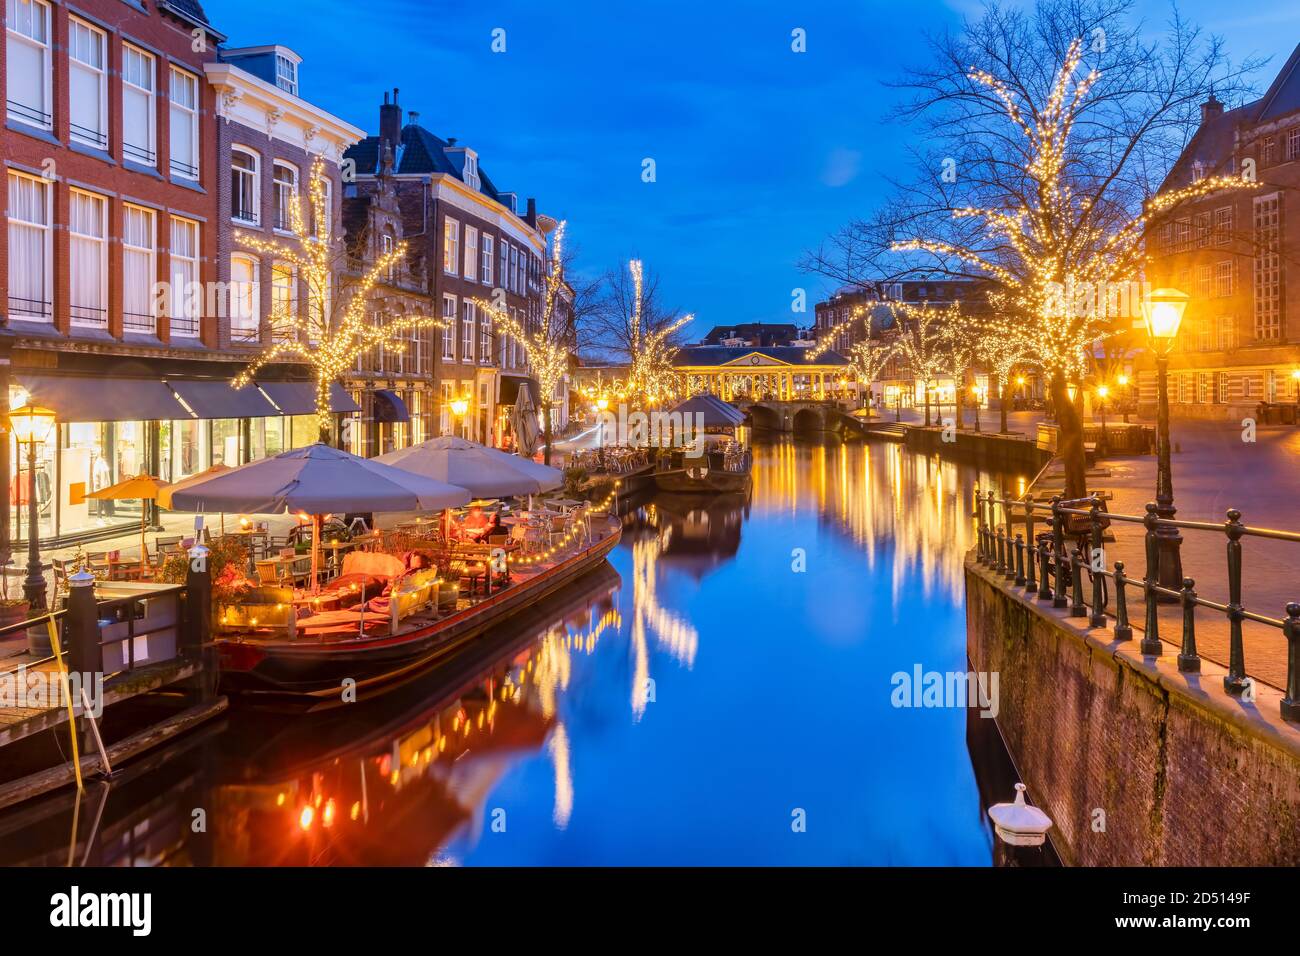 Ancient view of the Dutch Oude Rijn canal with bridge, historic buildings and christmas lights in the city center of Leiden, The Netherlands Stock Photo